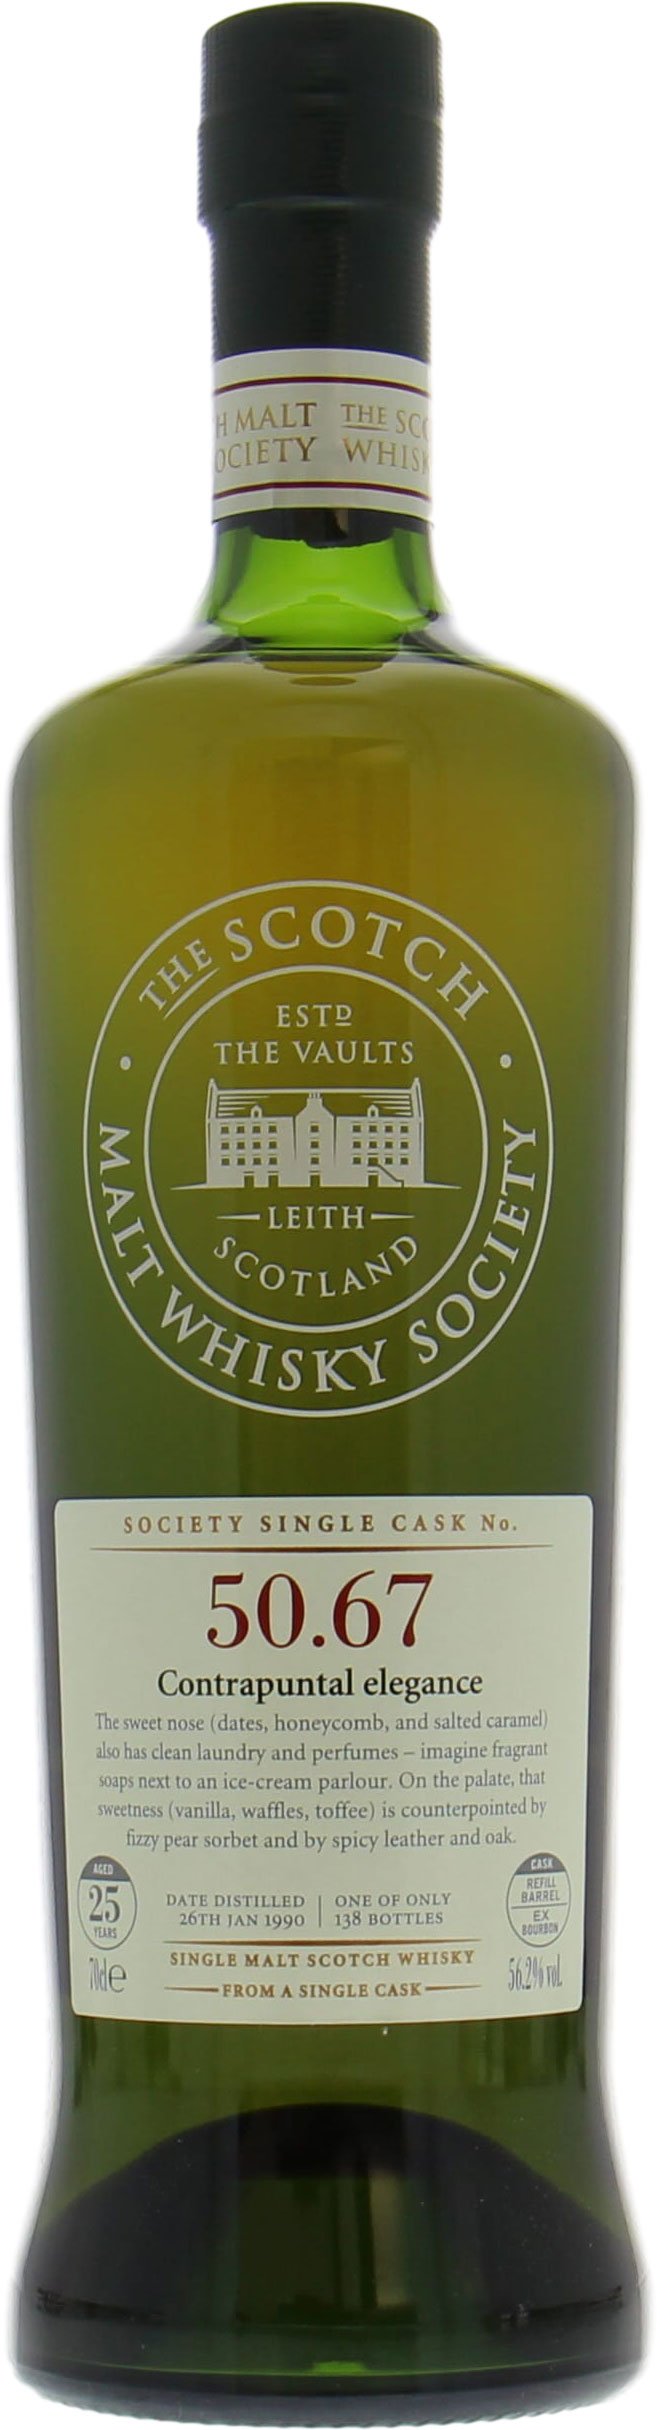 Bladnoch - 25 Years Old SMWS 50.67 Contrapuntal elegance 56.2% 1990